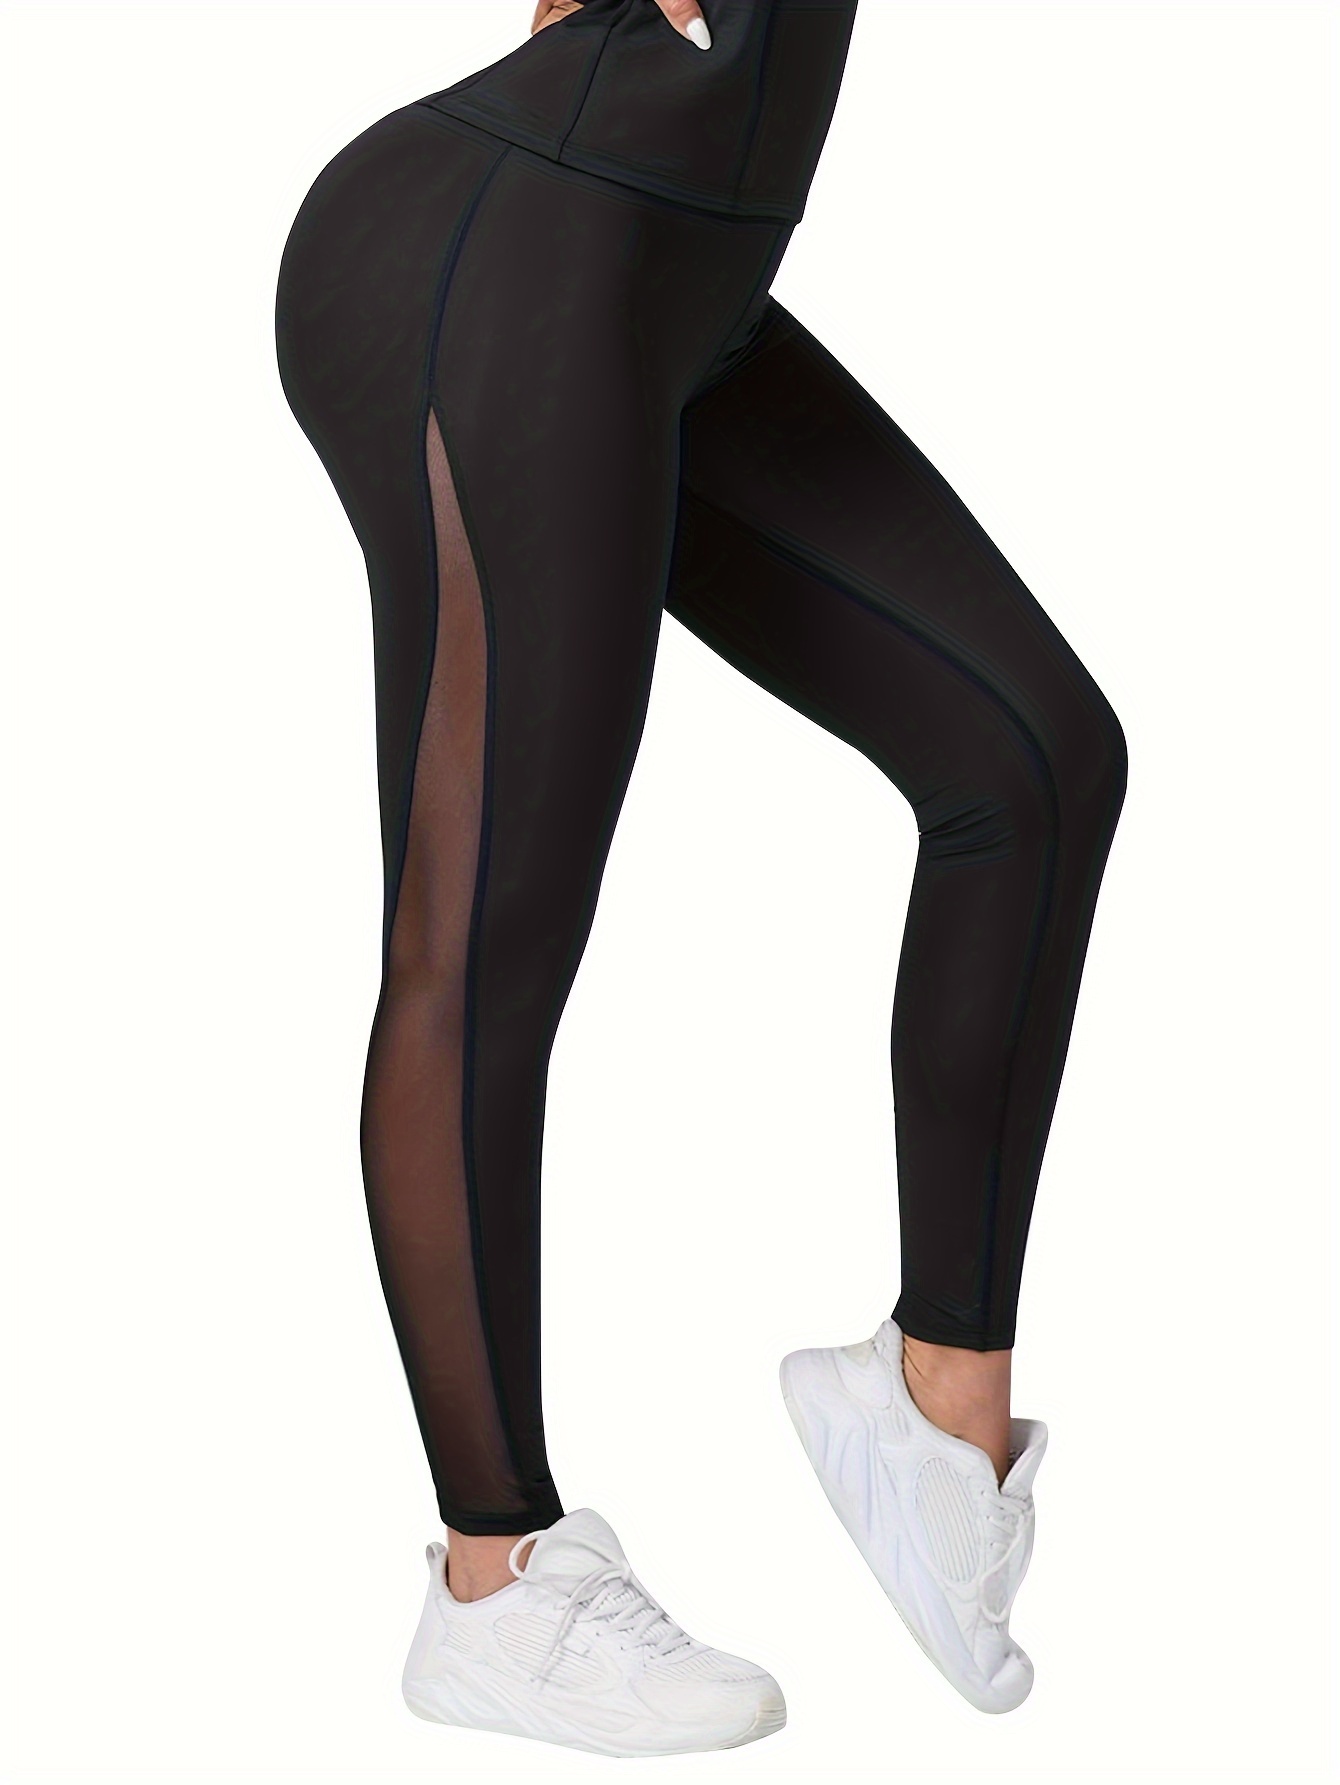 Black Spliced Classic Fit Yoga Pants For Teen Girls, Great For Exercise,  Work Out, Indoor Dance, Riding And Running